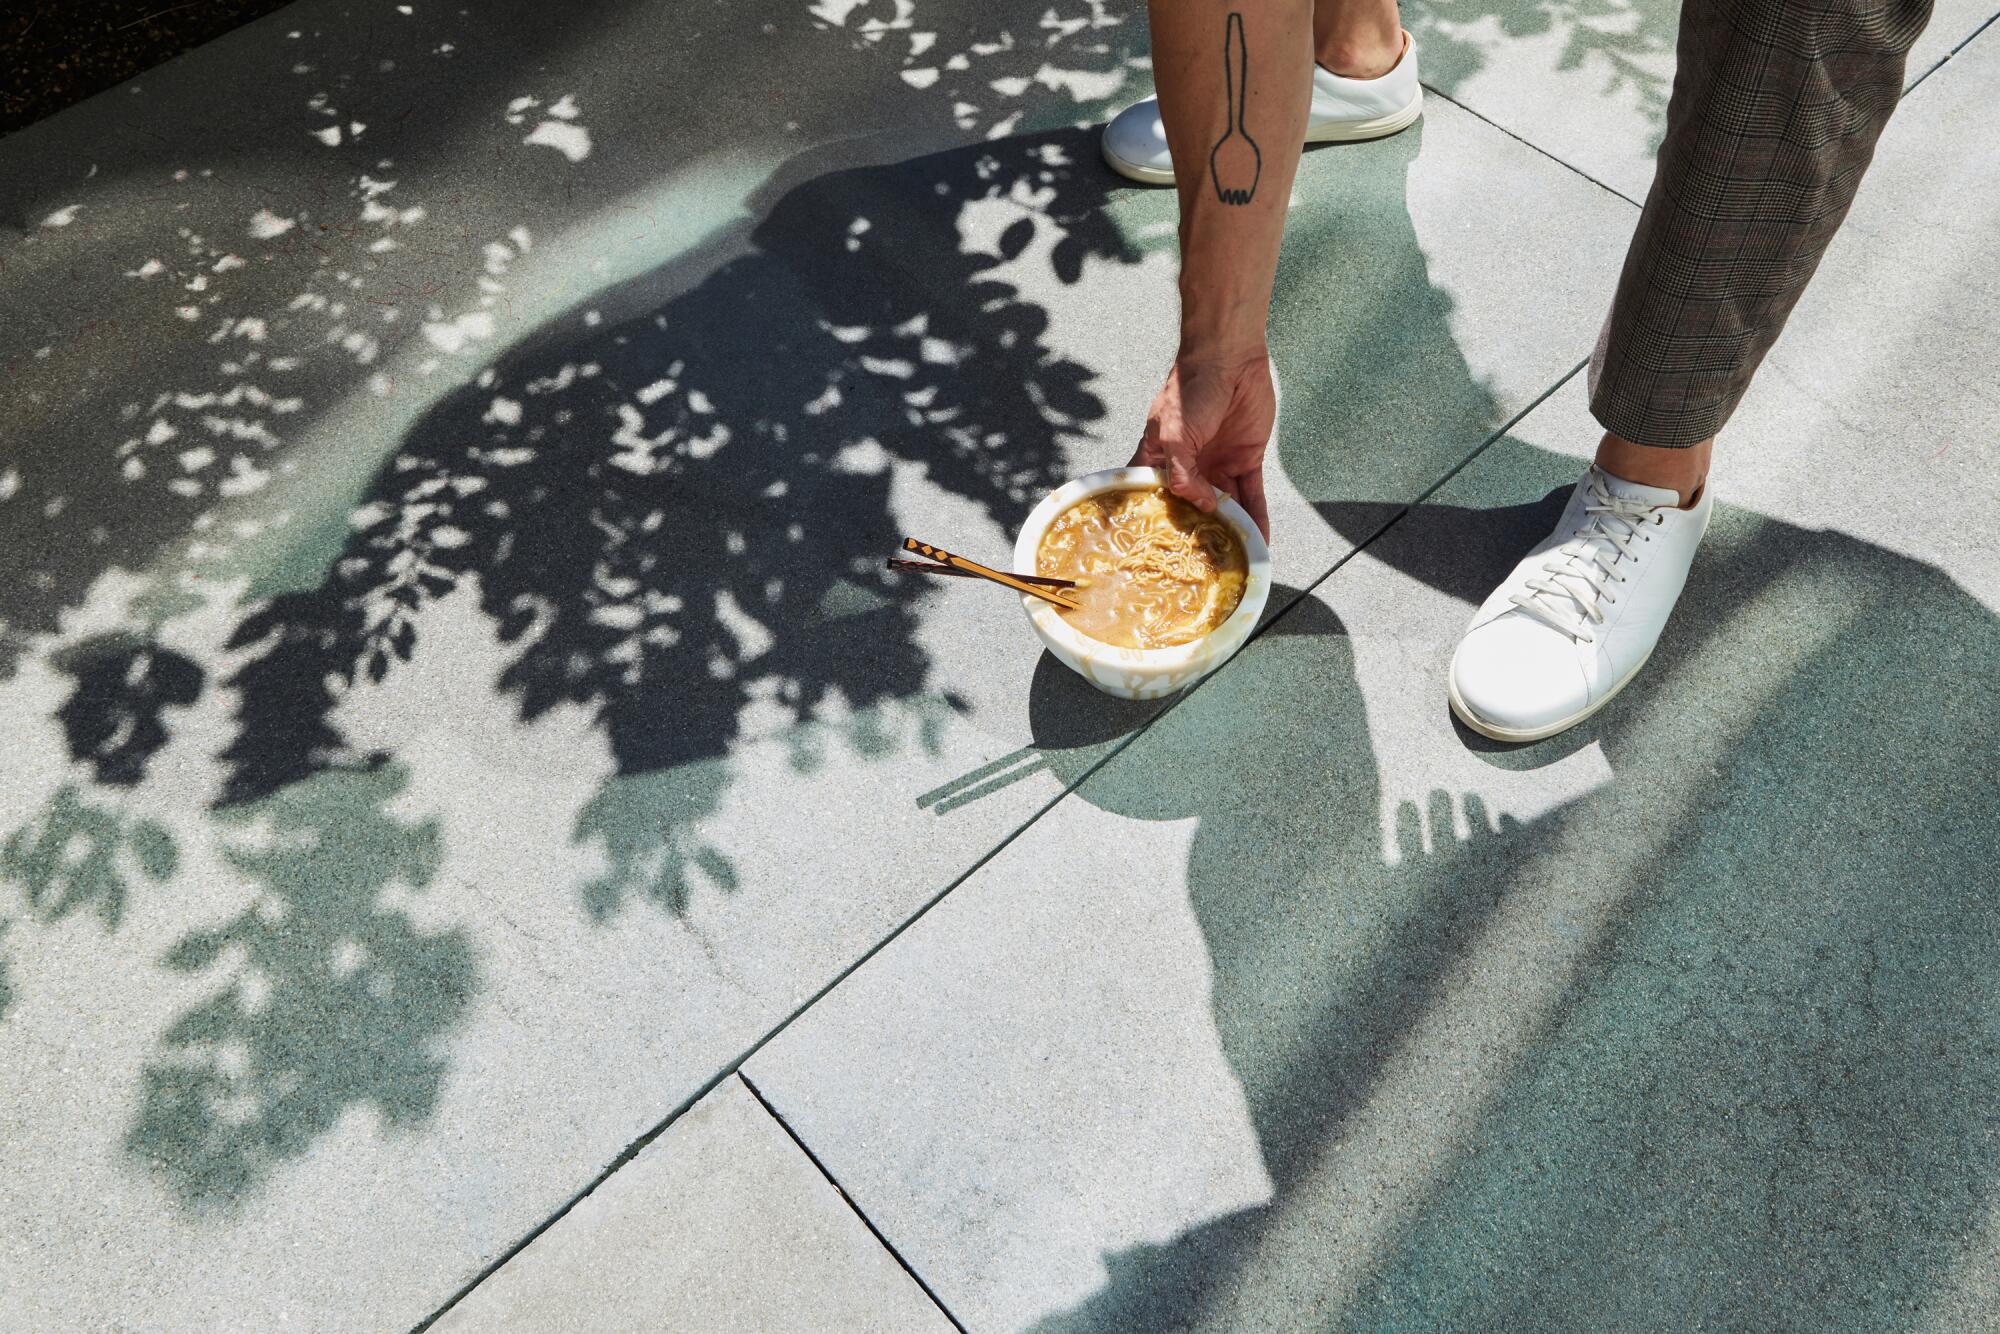 Scherer sets a bowl of French onion ramen on the ground outside.